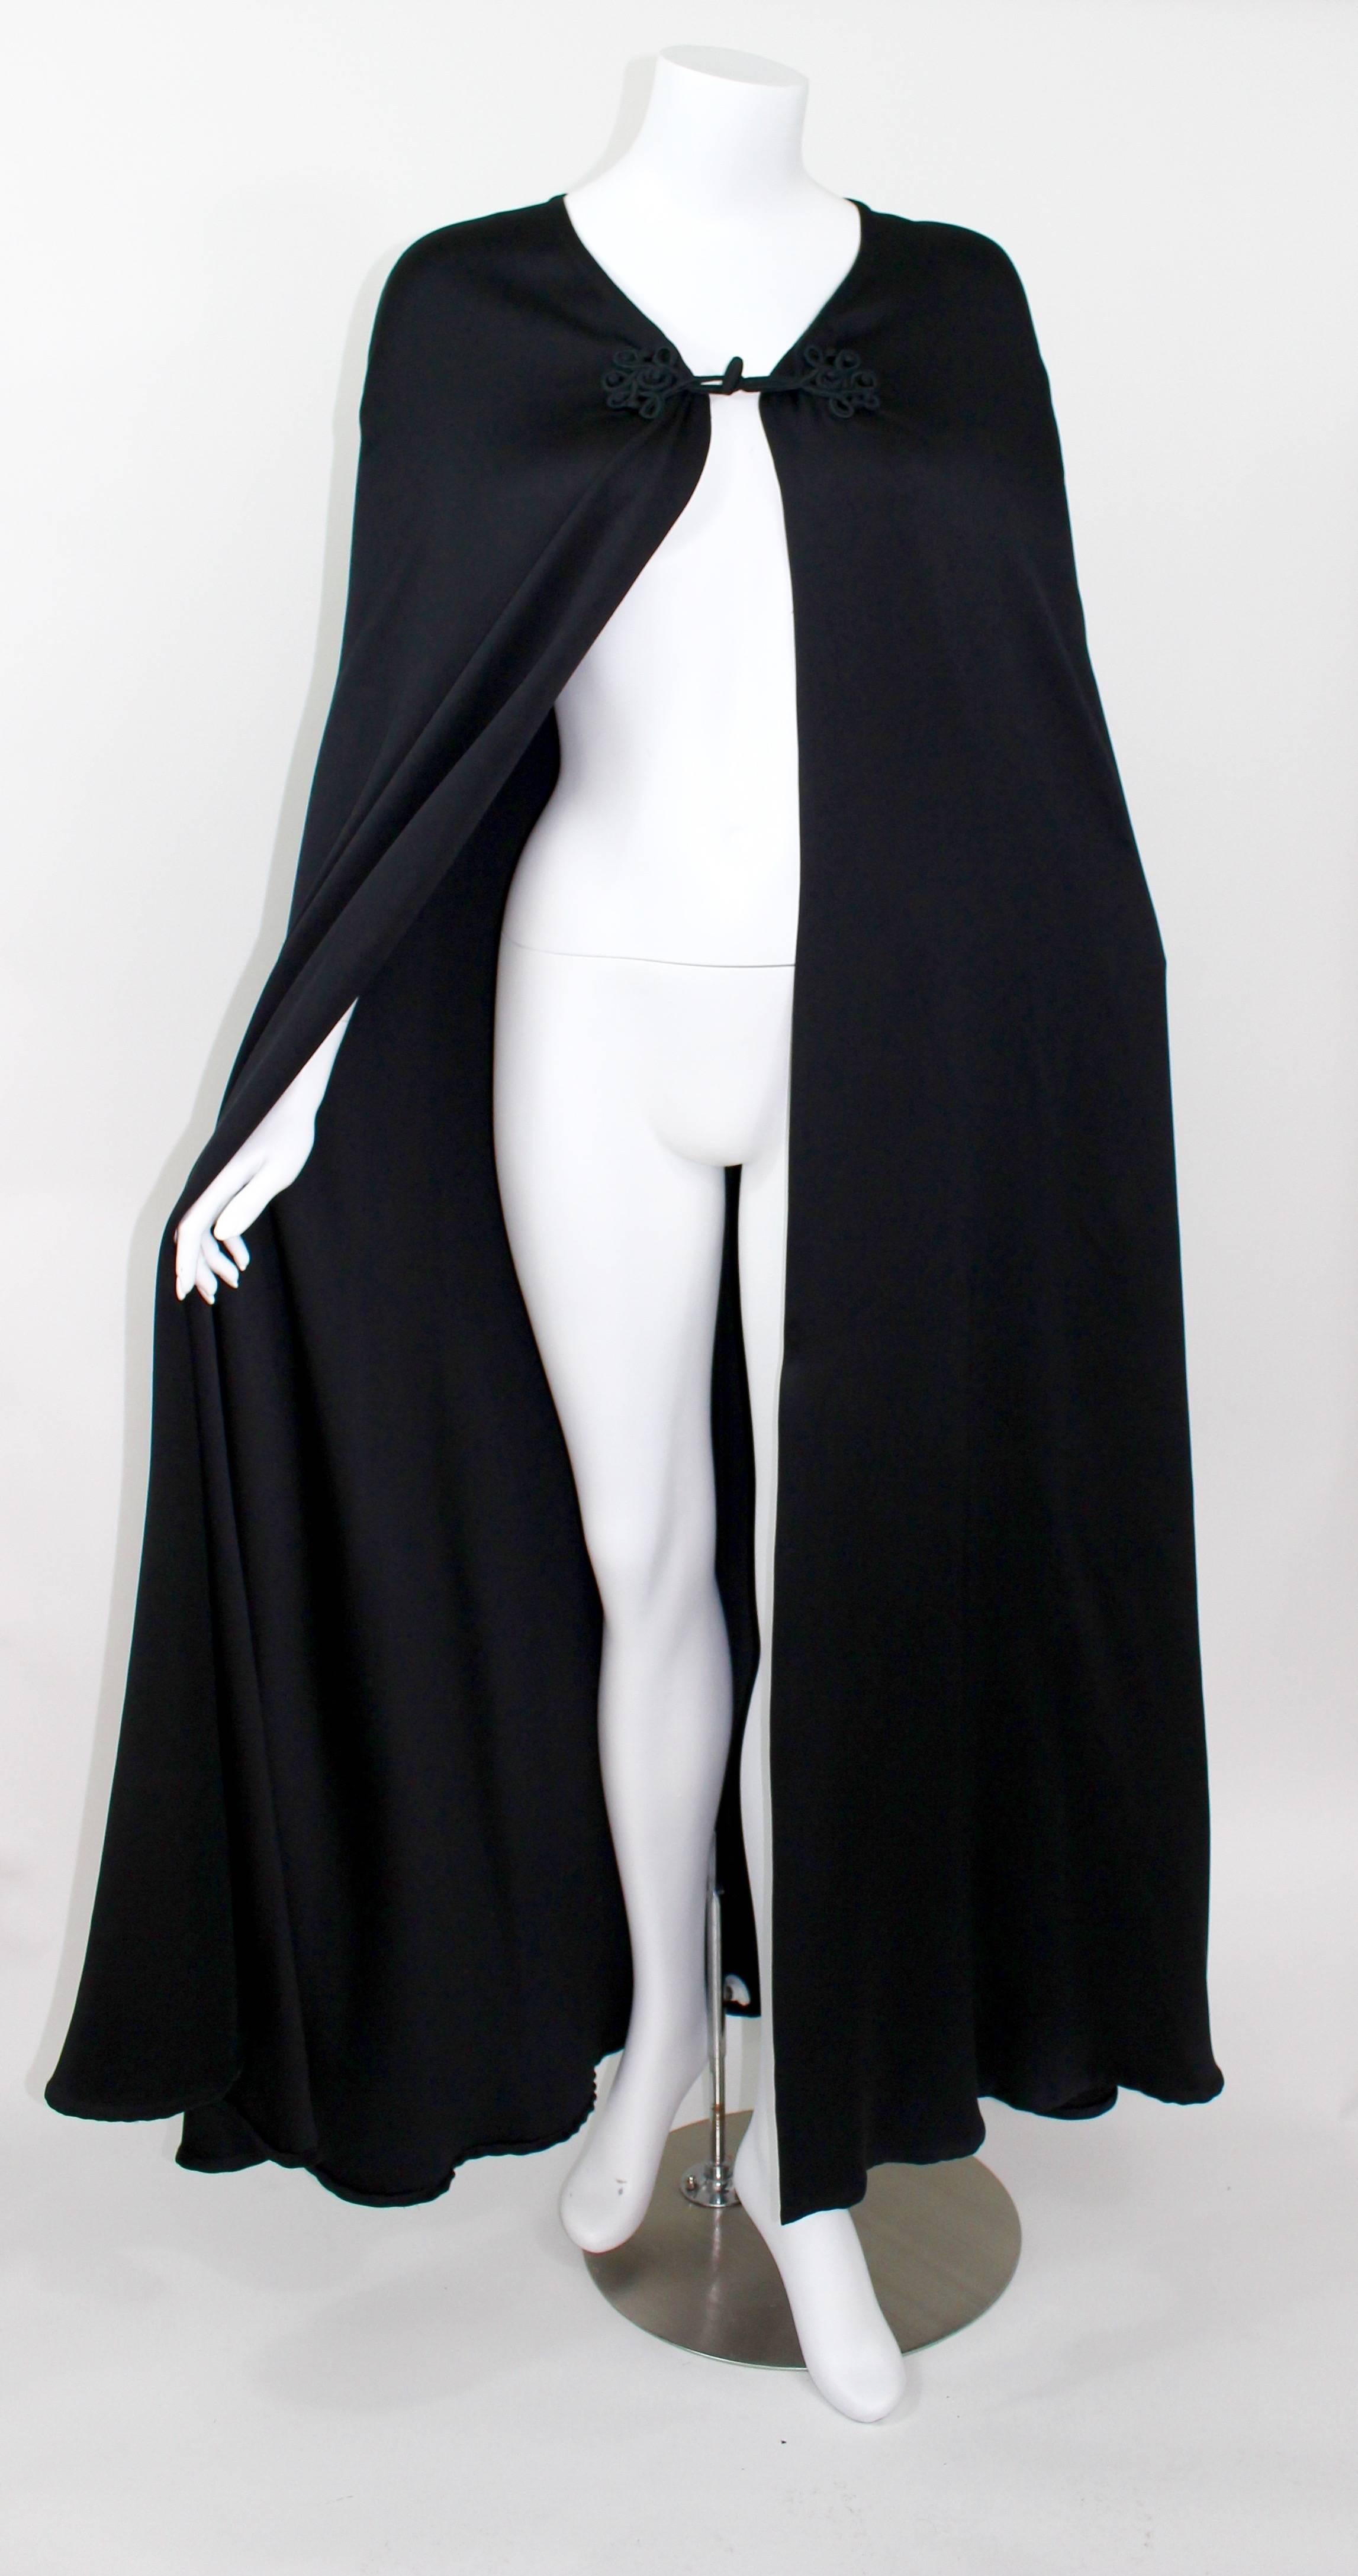 A Valentino Couture vintage cape. 
Circa late 1970s.
The jet black satin is extremely smooth and of superior quality.
Embroidered toggle closures are hand sewn.
The hem and frame of the cape are finished to perfection.

In Excellent condition aside